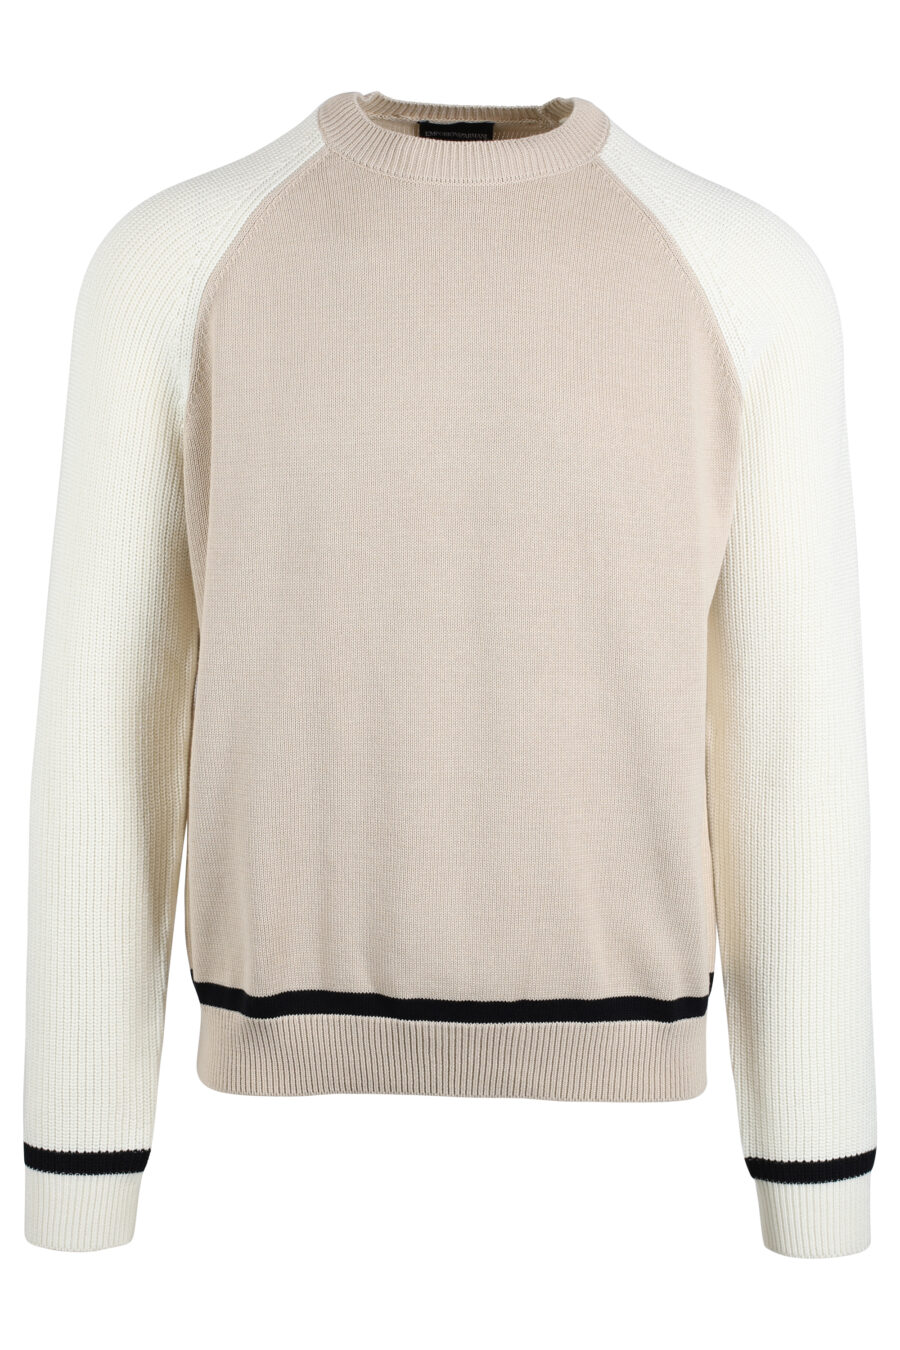 Beige knitted jumper with mini-logo - IMG 4753